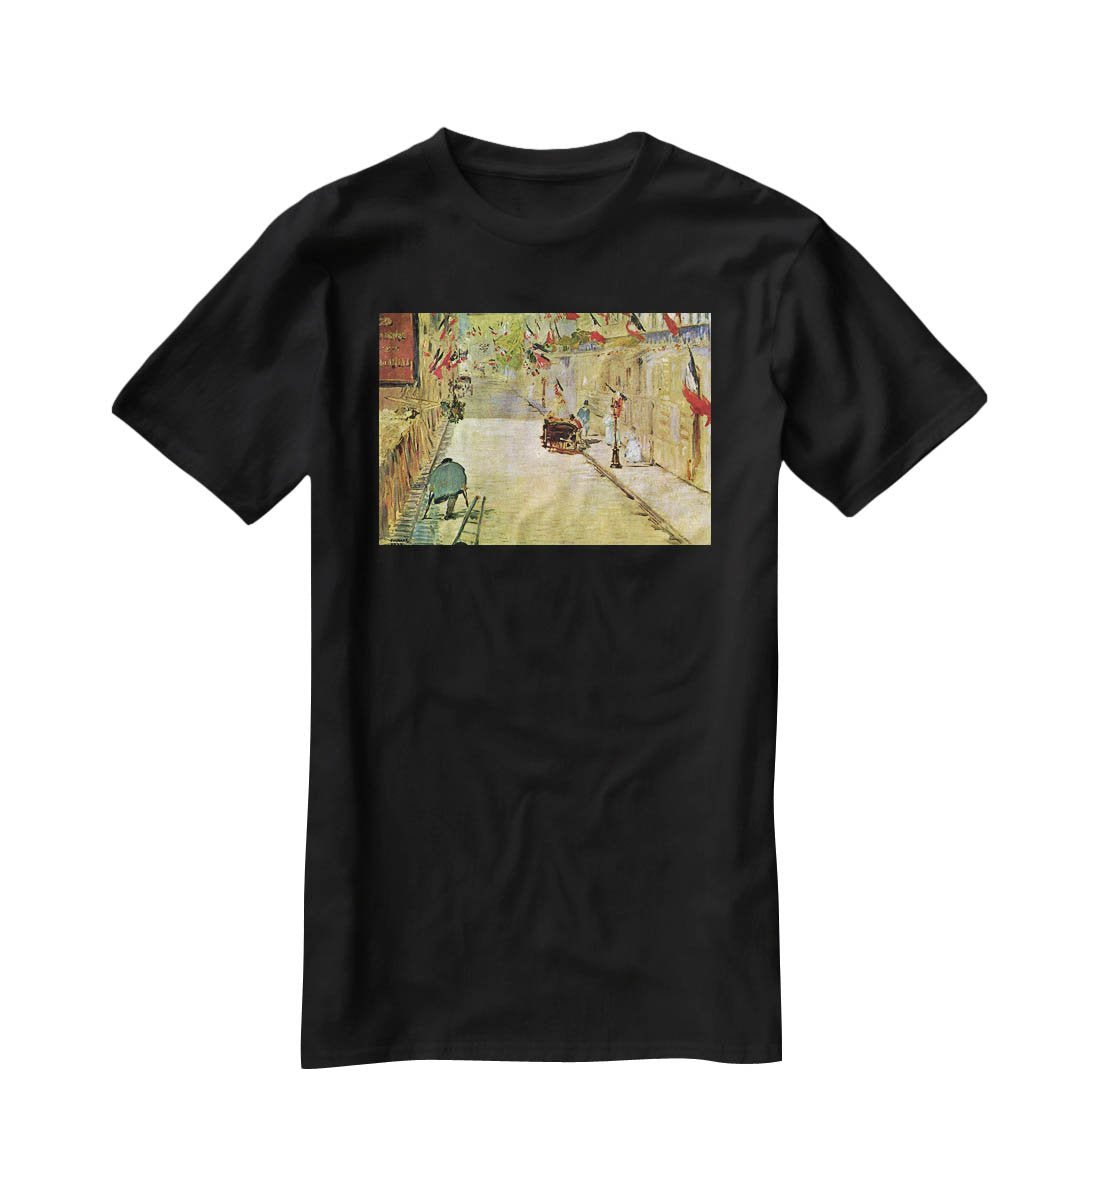 Rue Mosnier with Flags by Manet T-Shirt - Canvas Art Rocks - 1